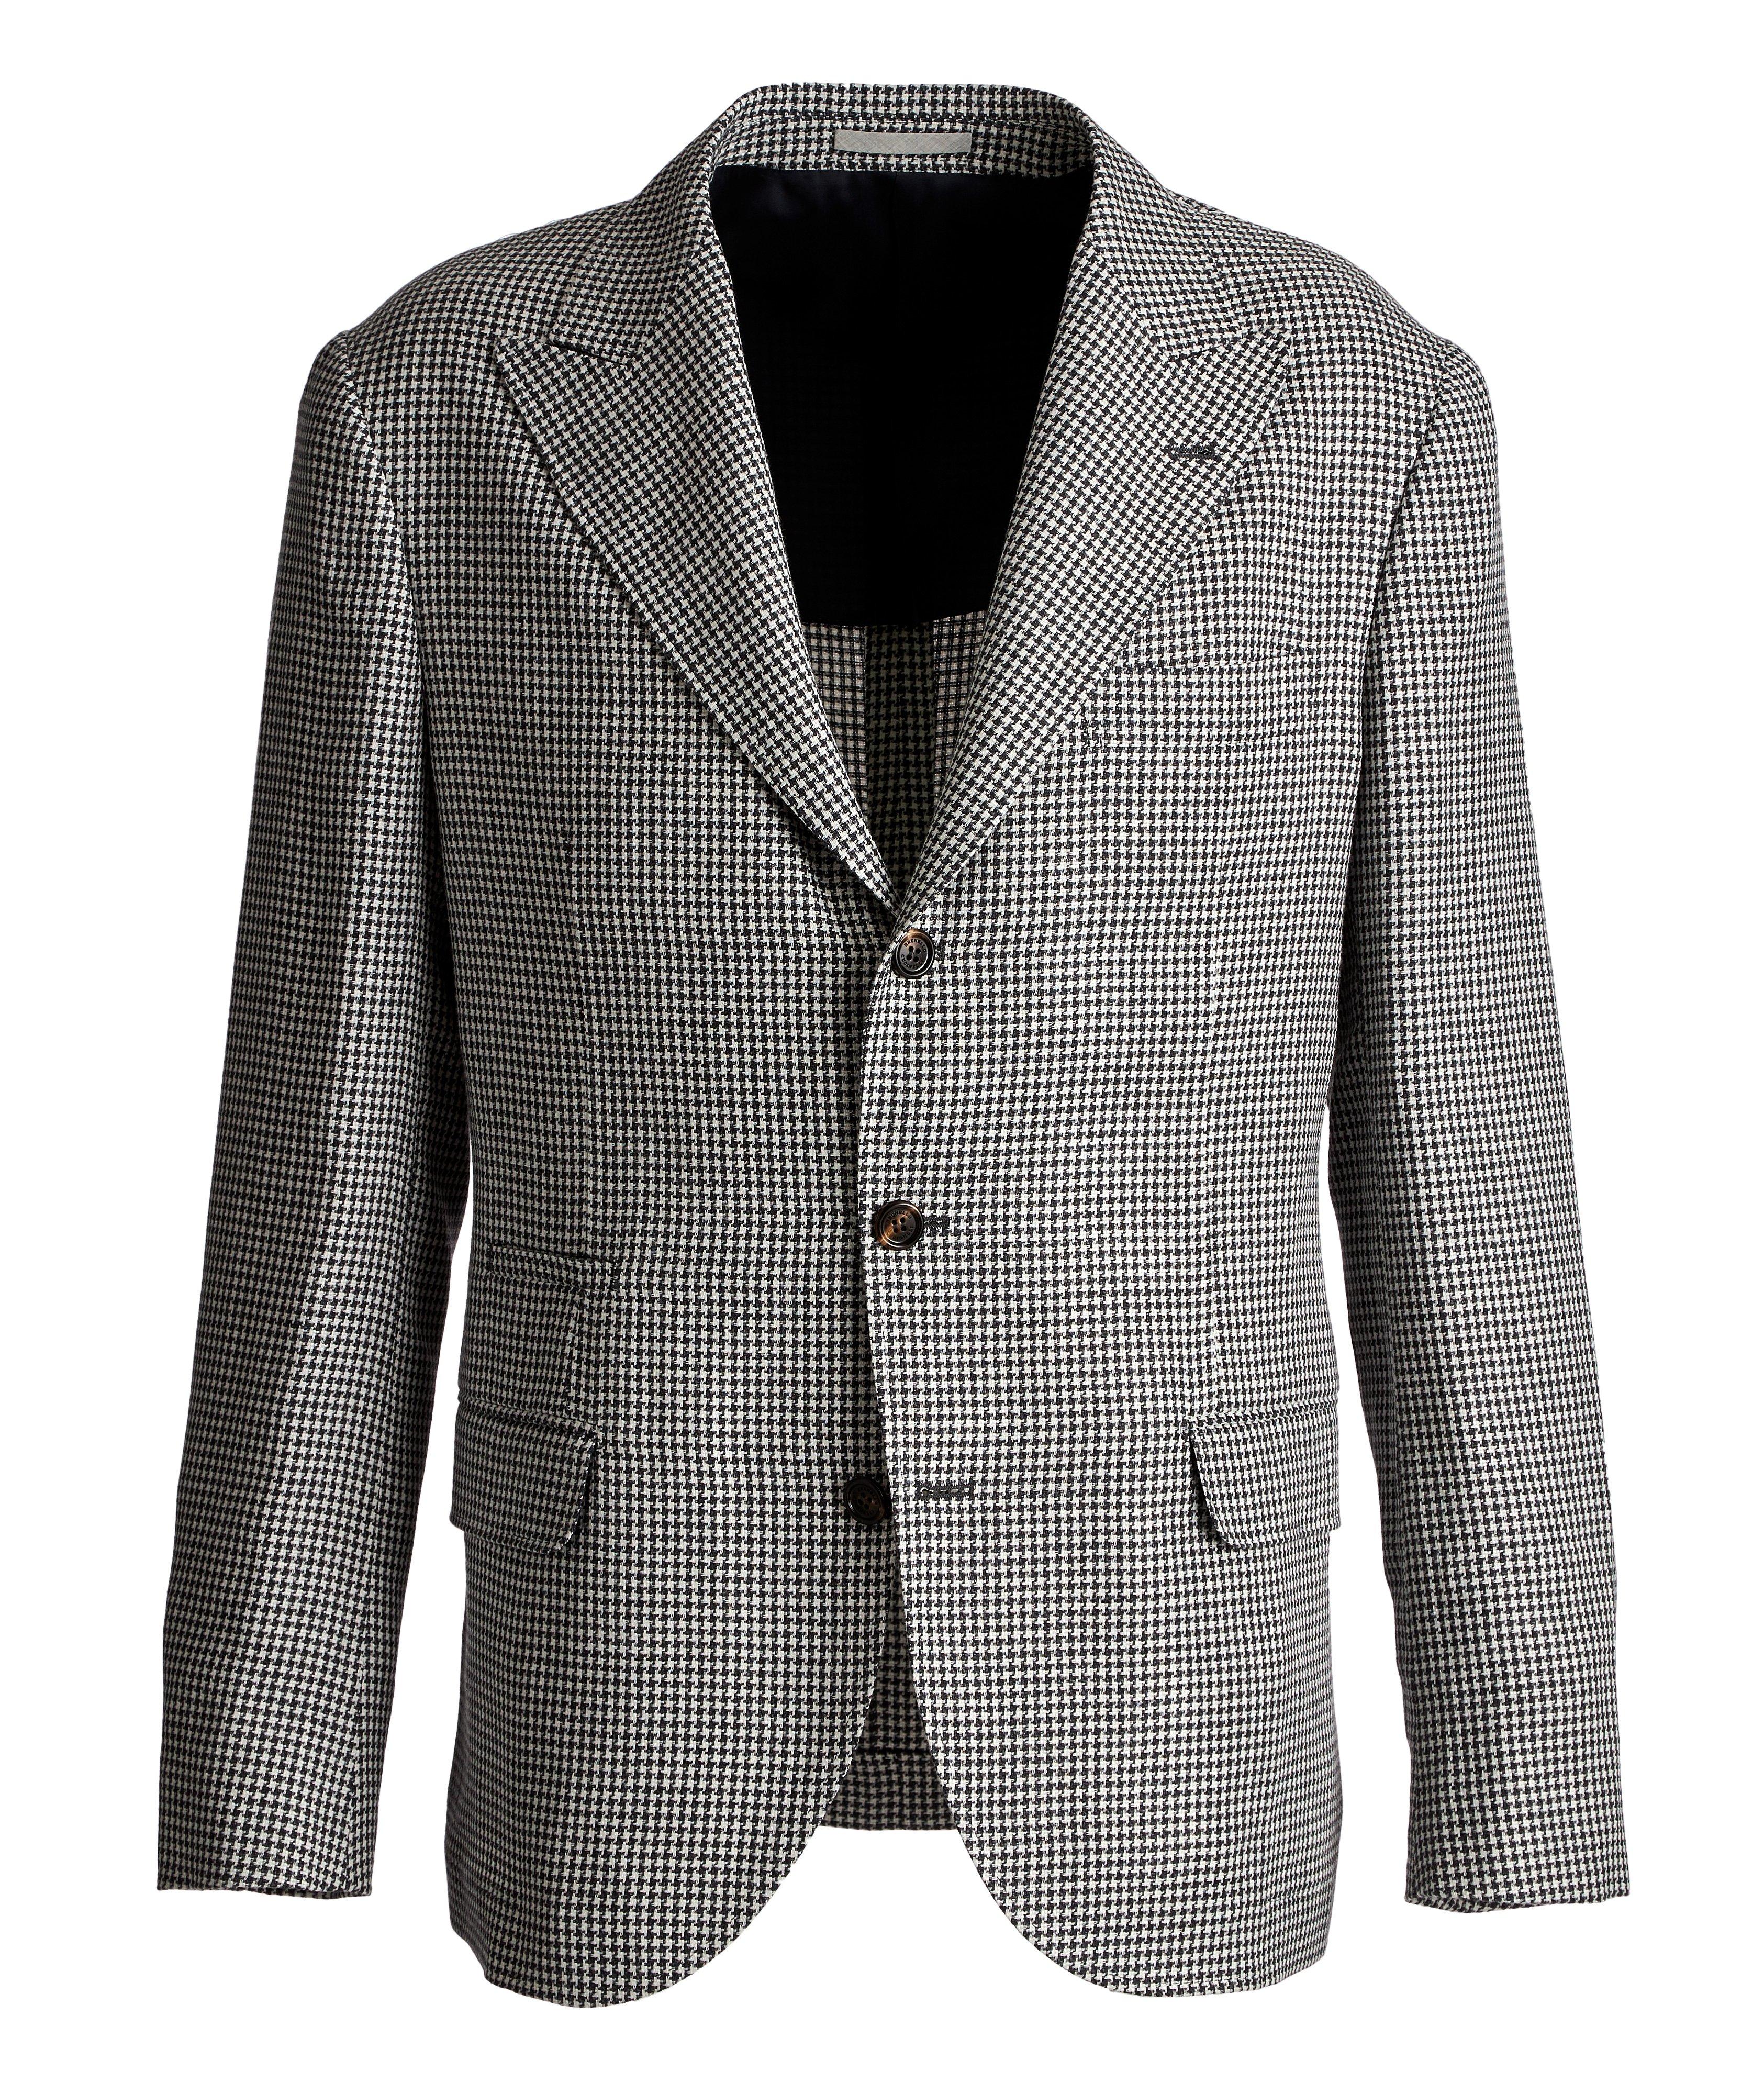 Houndstooth Linen, Wool, and Silk Sports Jacket image 0